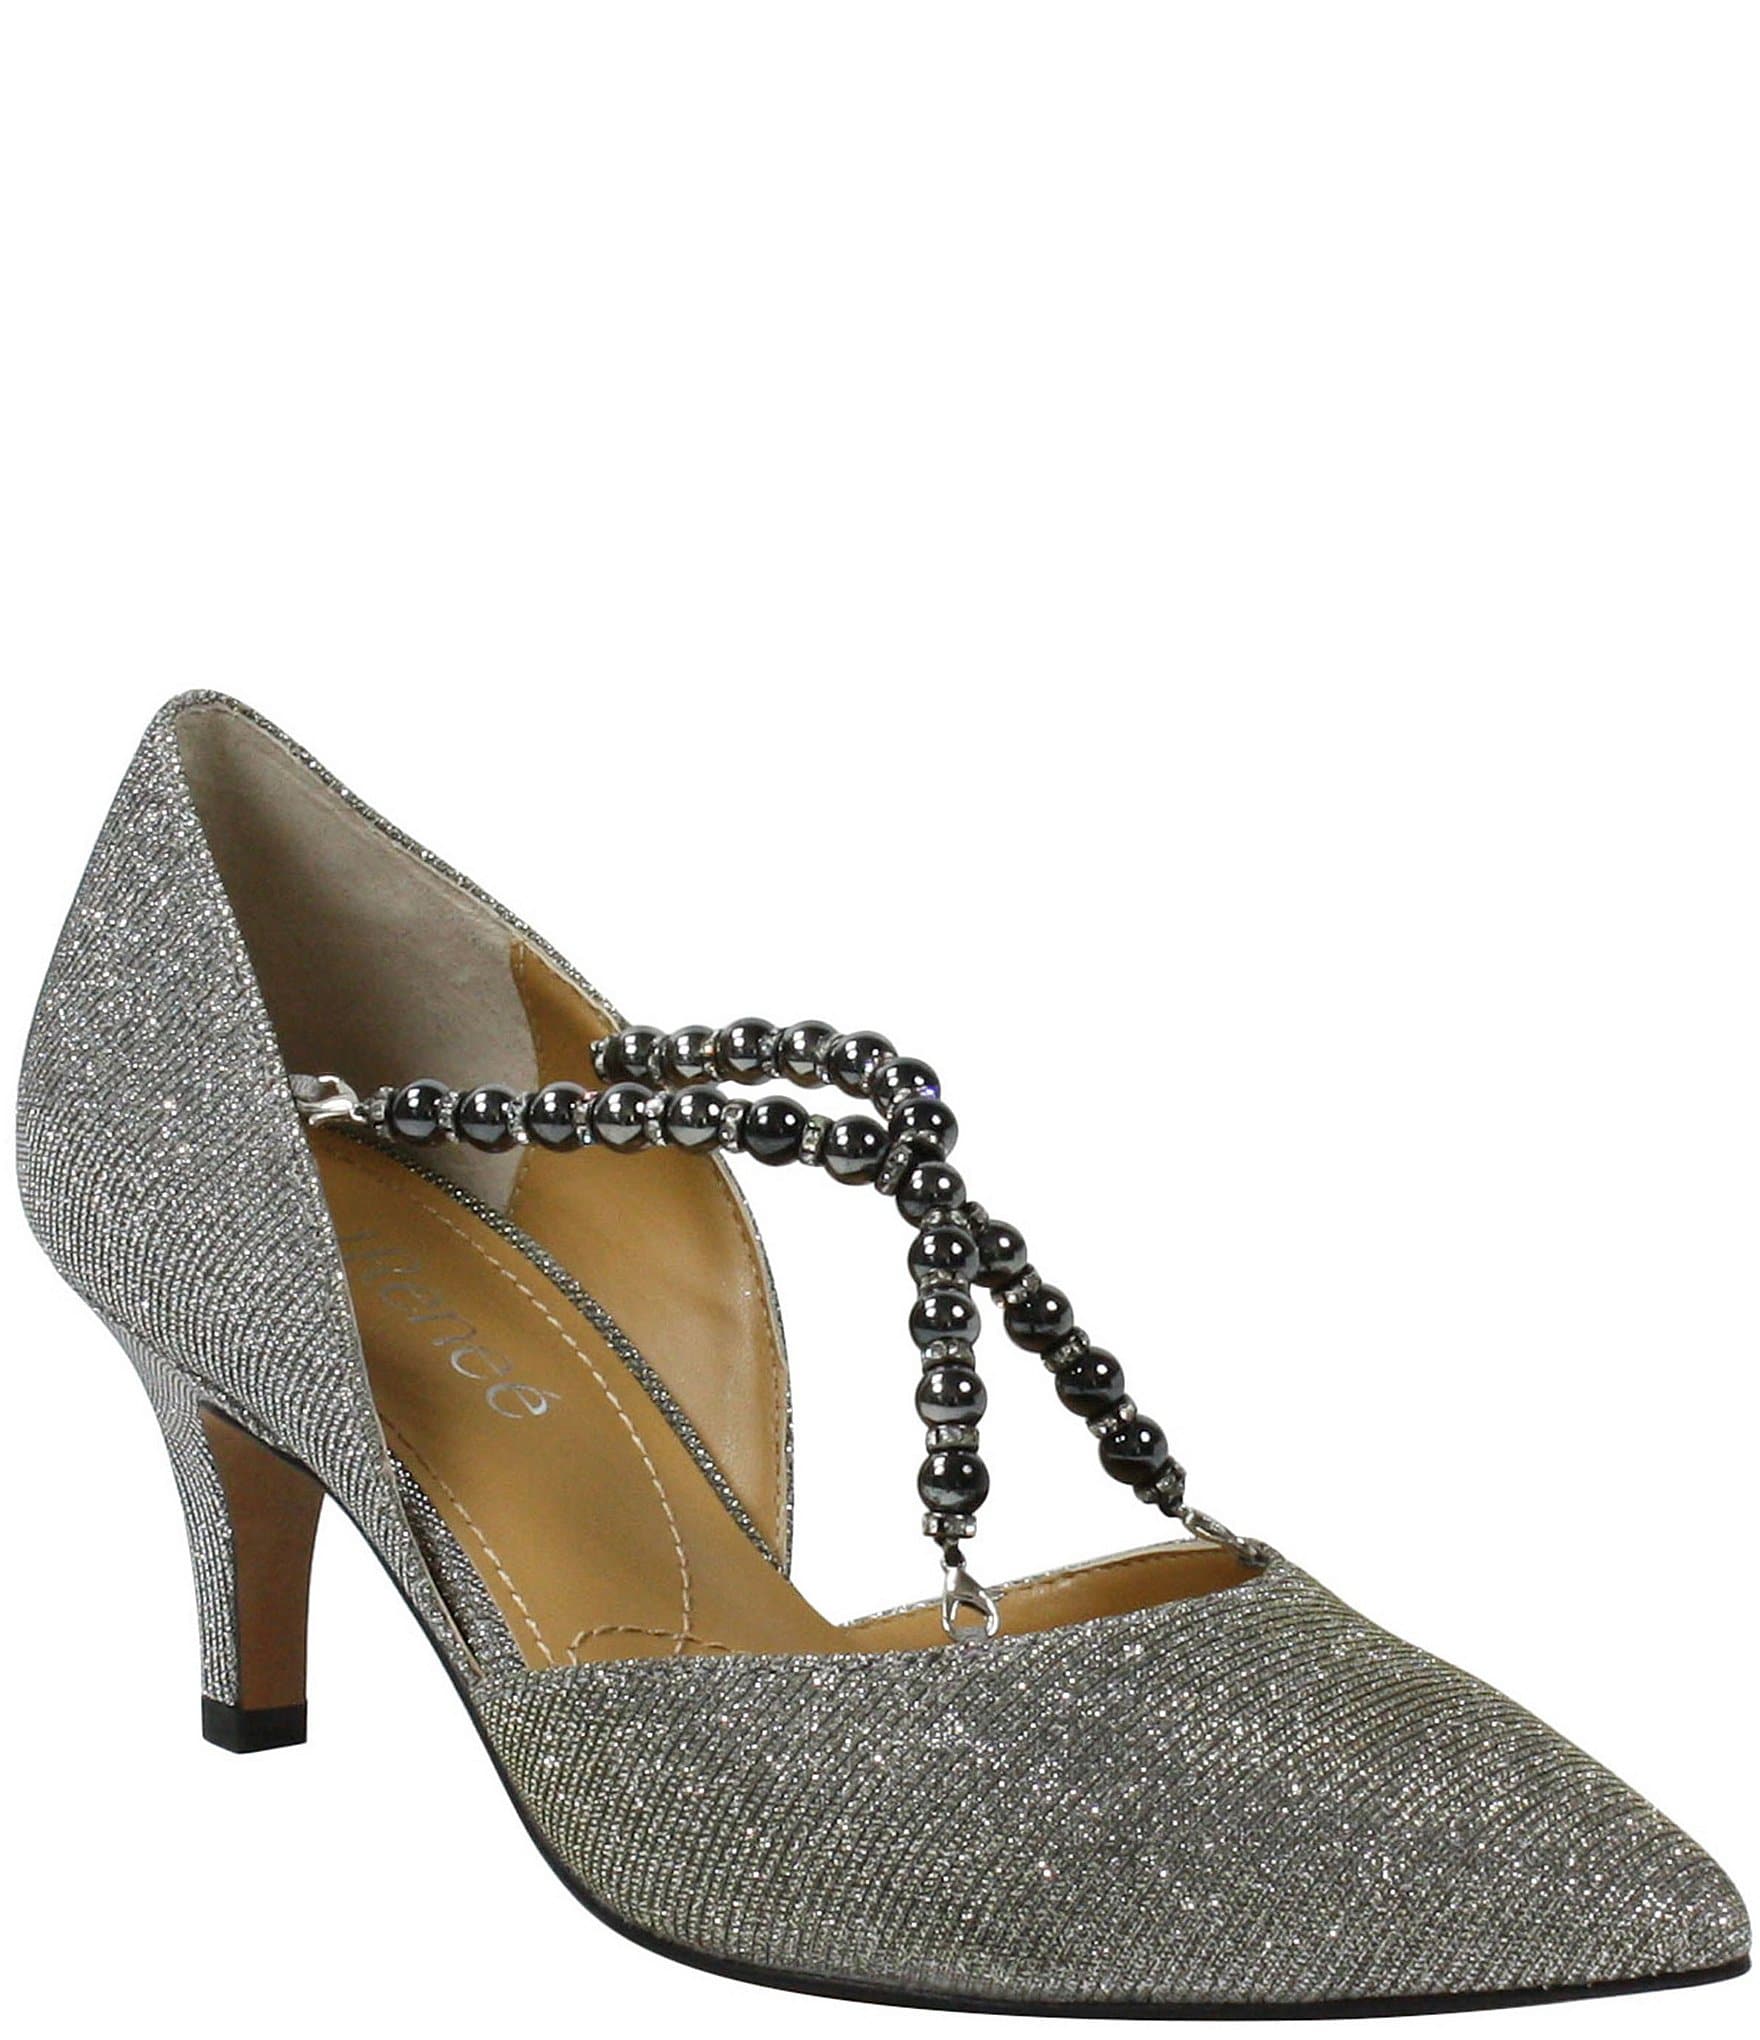 Details about   New women's shoes peep toe sequins evening stilettos high heel pewter formal 